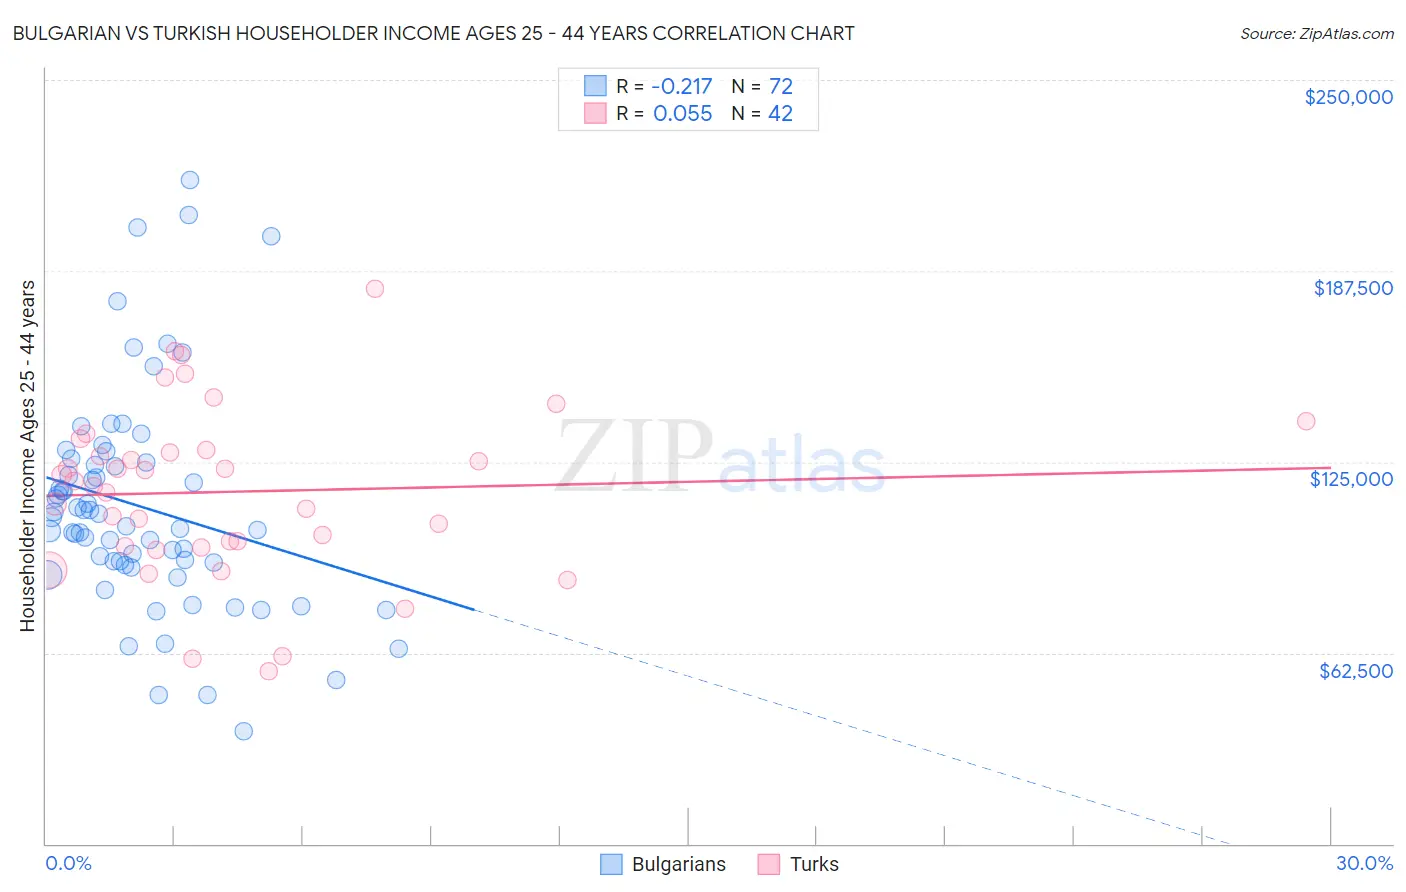 Bulgarian vs Turkish Householder Income Ages 25 - 44 years